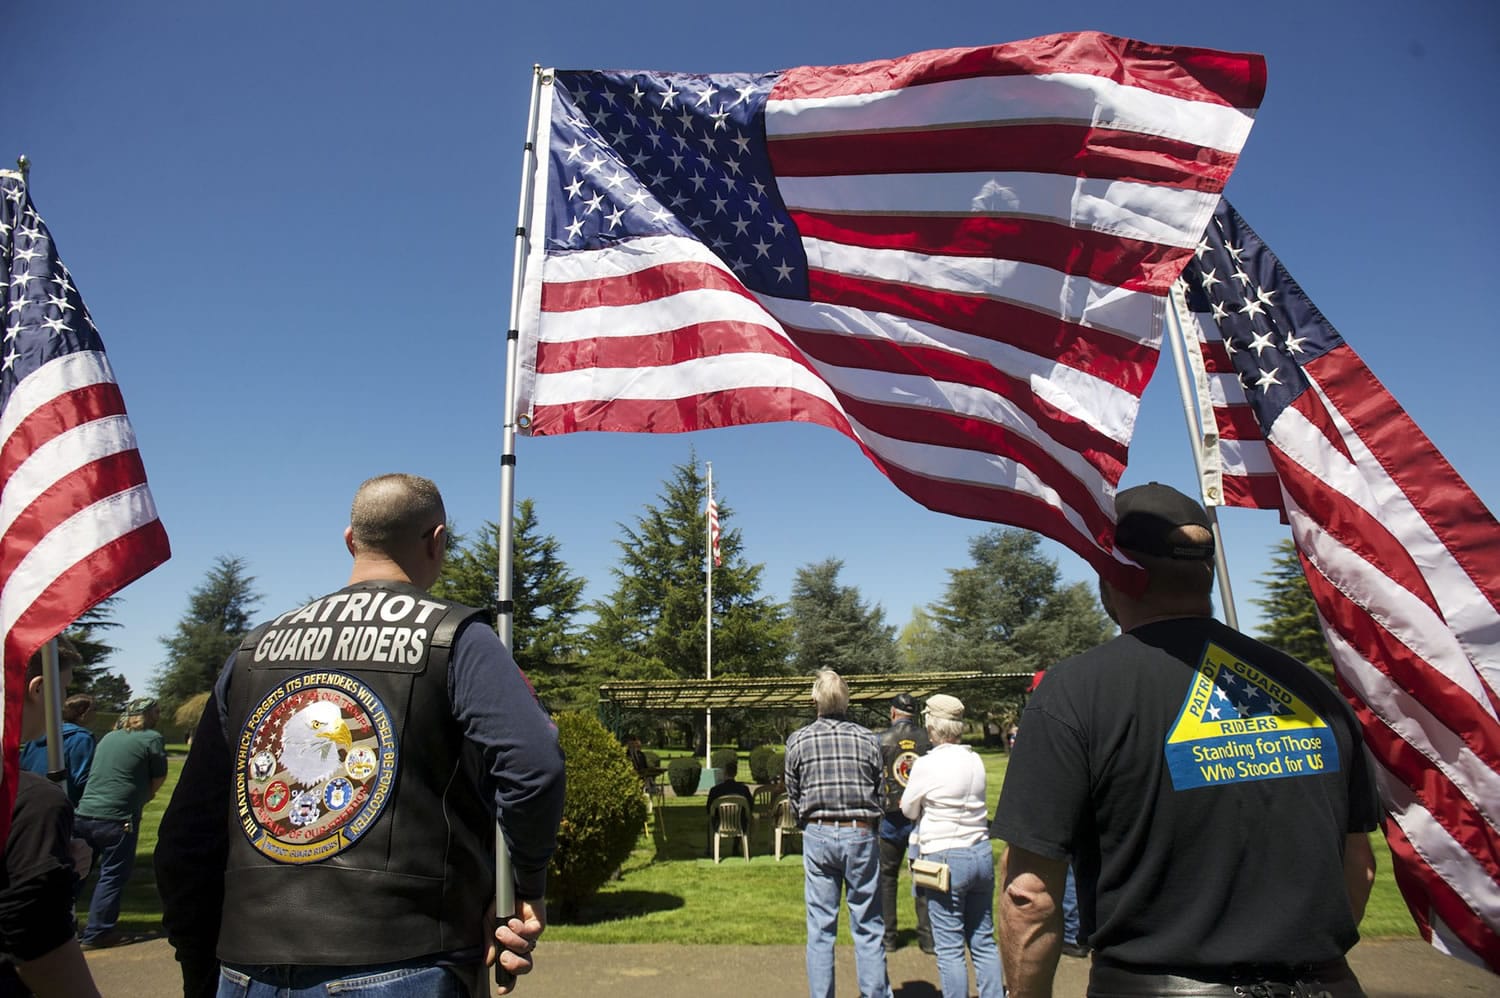 Patriot Guard riders hold flags during a memorial service for veterans that did not receive a full military funeral at Evergreen Memorial Gardens.